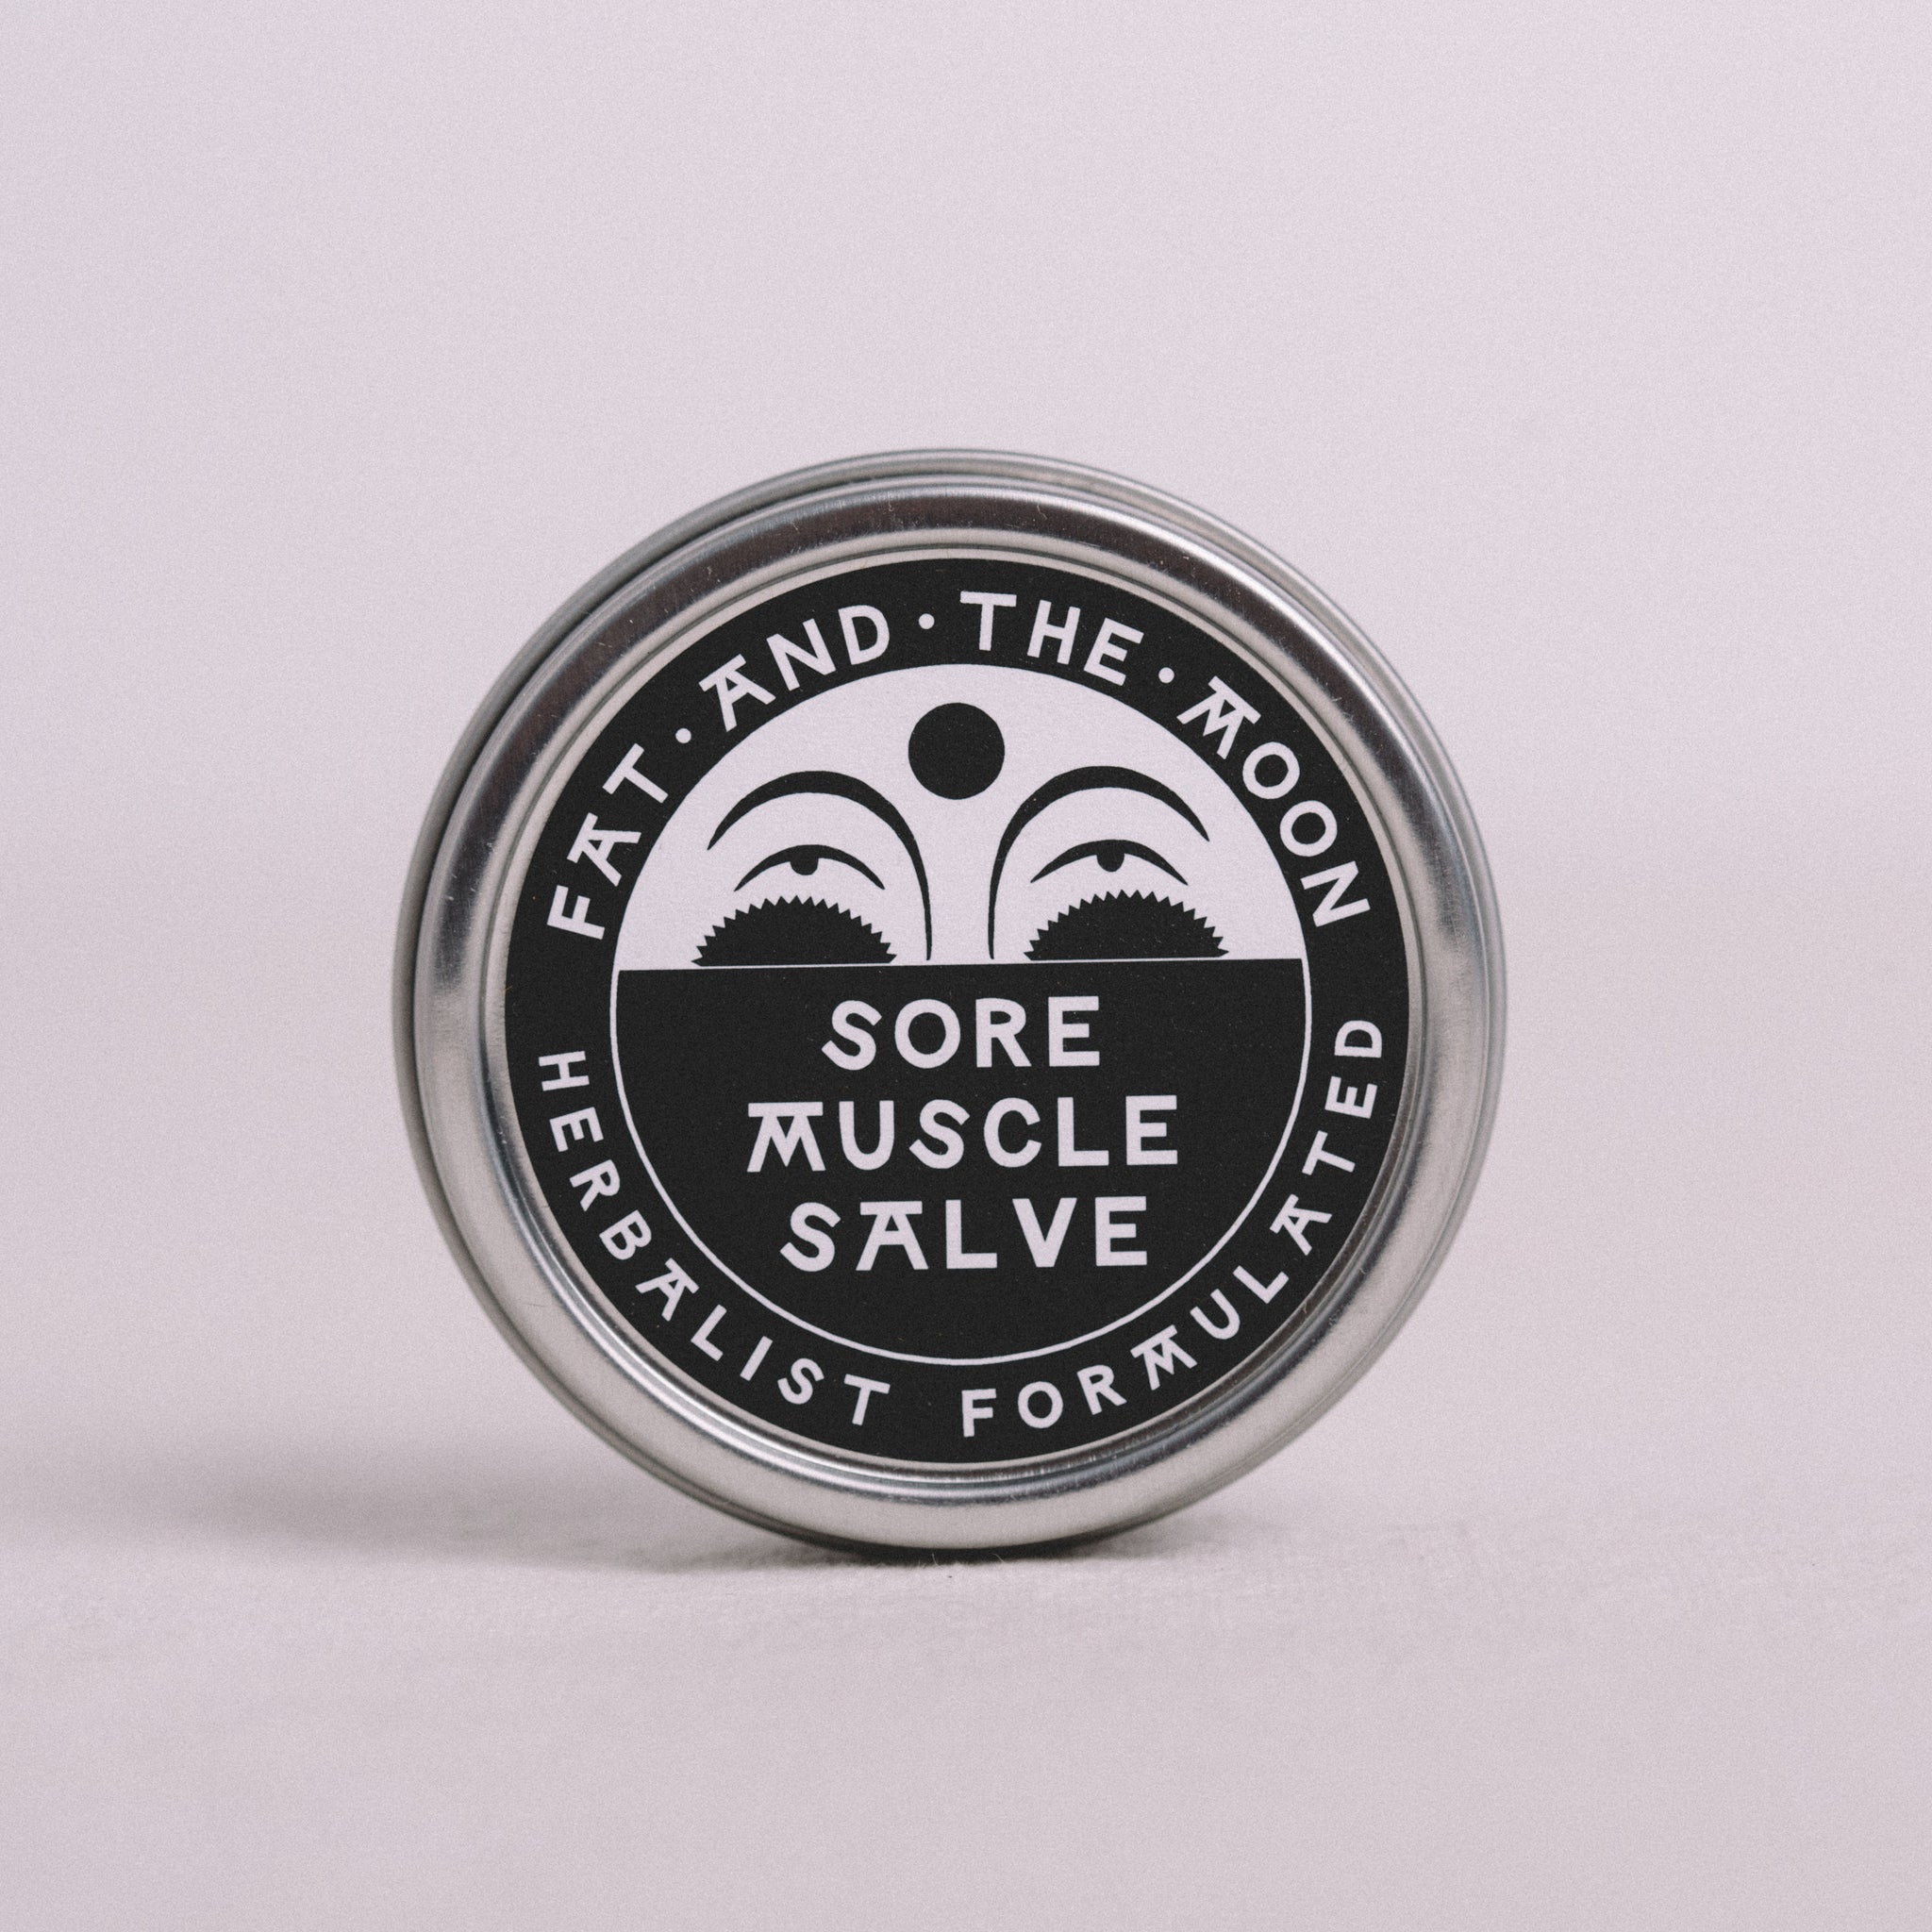 SORE MUSCLE SALVE || FAT AND THE MOON